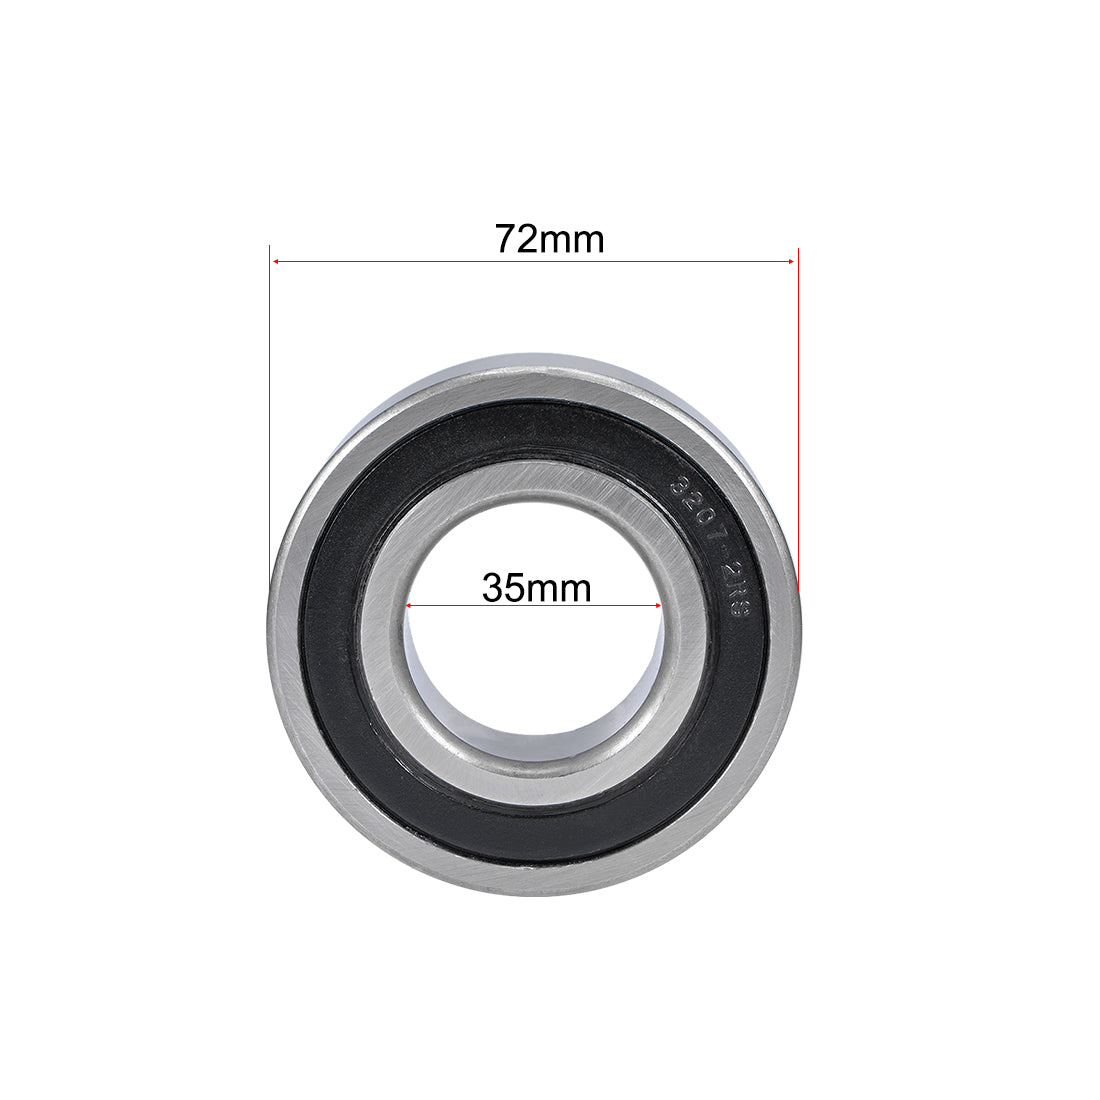 Uxcell Uxcell 3206-2RS Angular Contact Ball Bearing 30x62x24mm Sealed Bearings 5206-2RS 2pcs